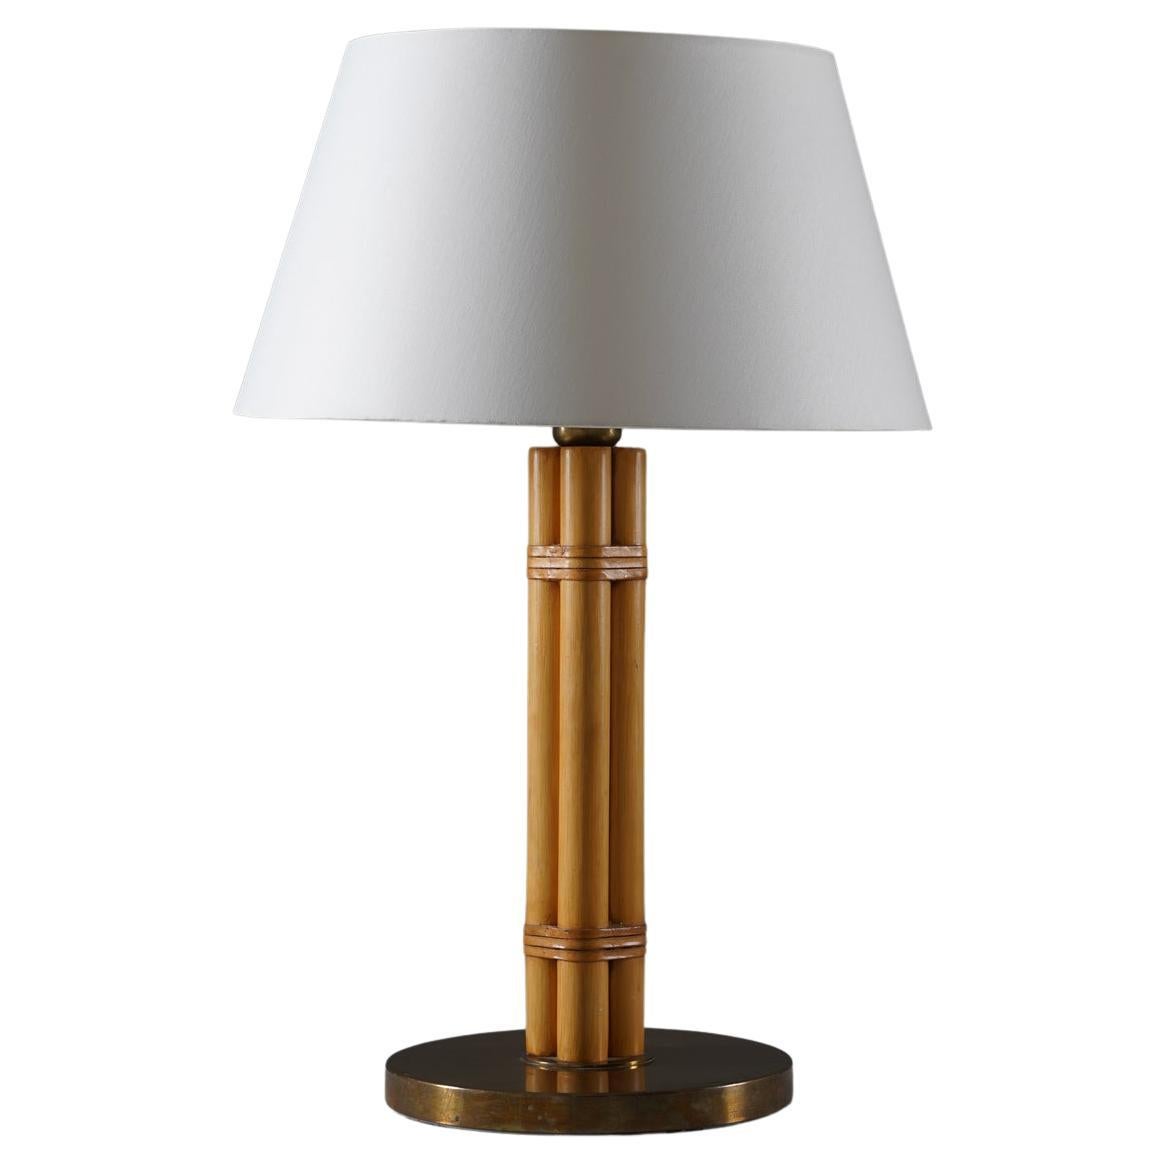 Scandinavian Midcentury Table Lamp in Brass and Bamboo by Bergboms, Sweden For Sale